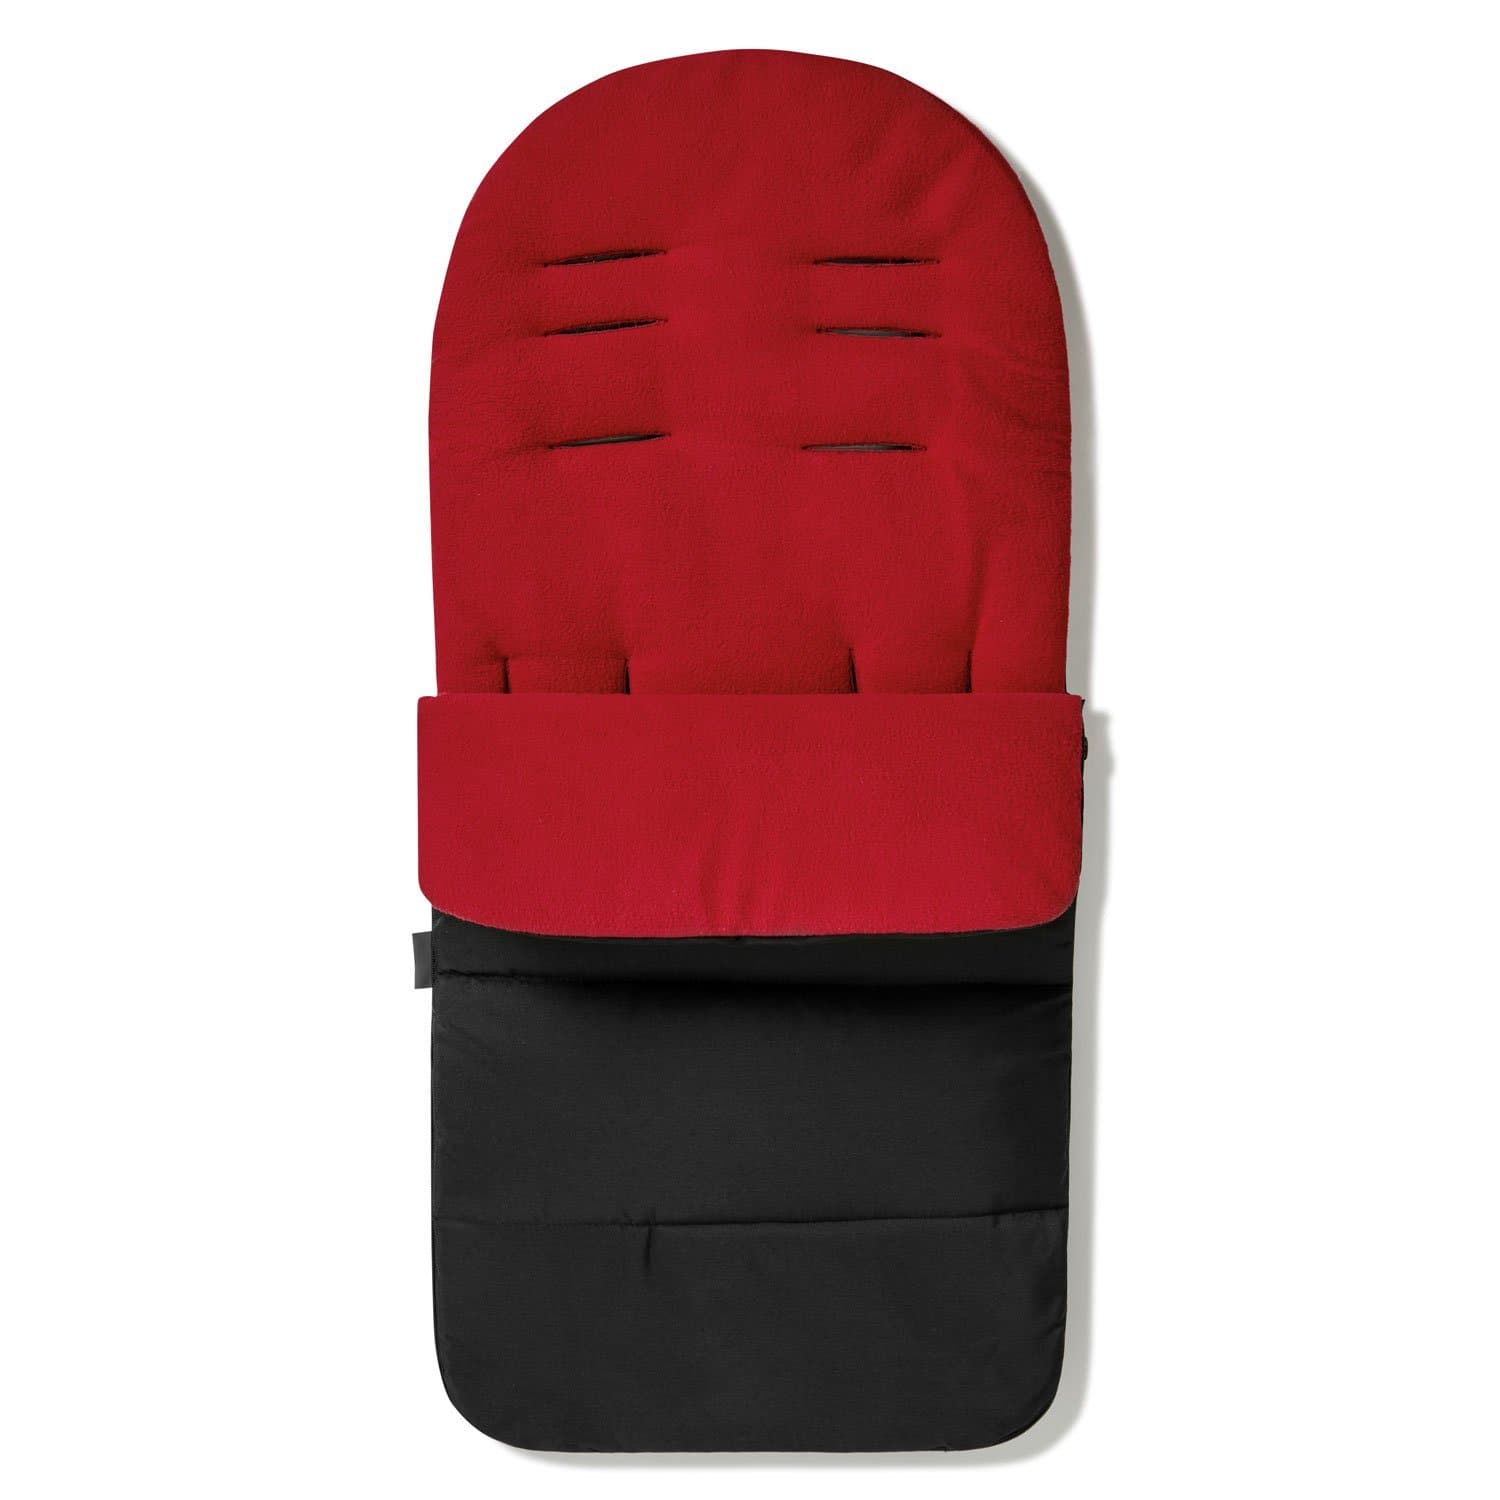 Premium Footmuff / Cosy Toes Compatible with Babystyle - For Your Little One